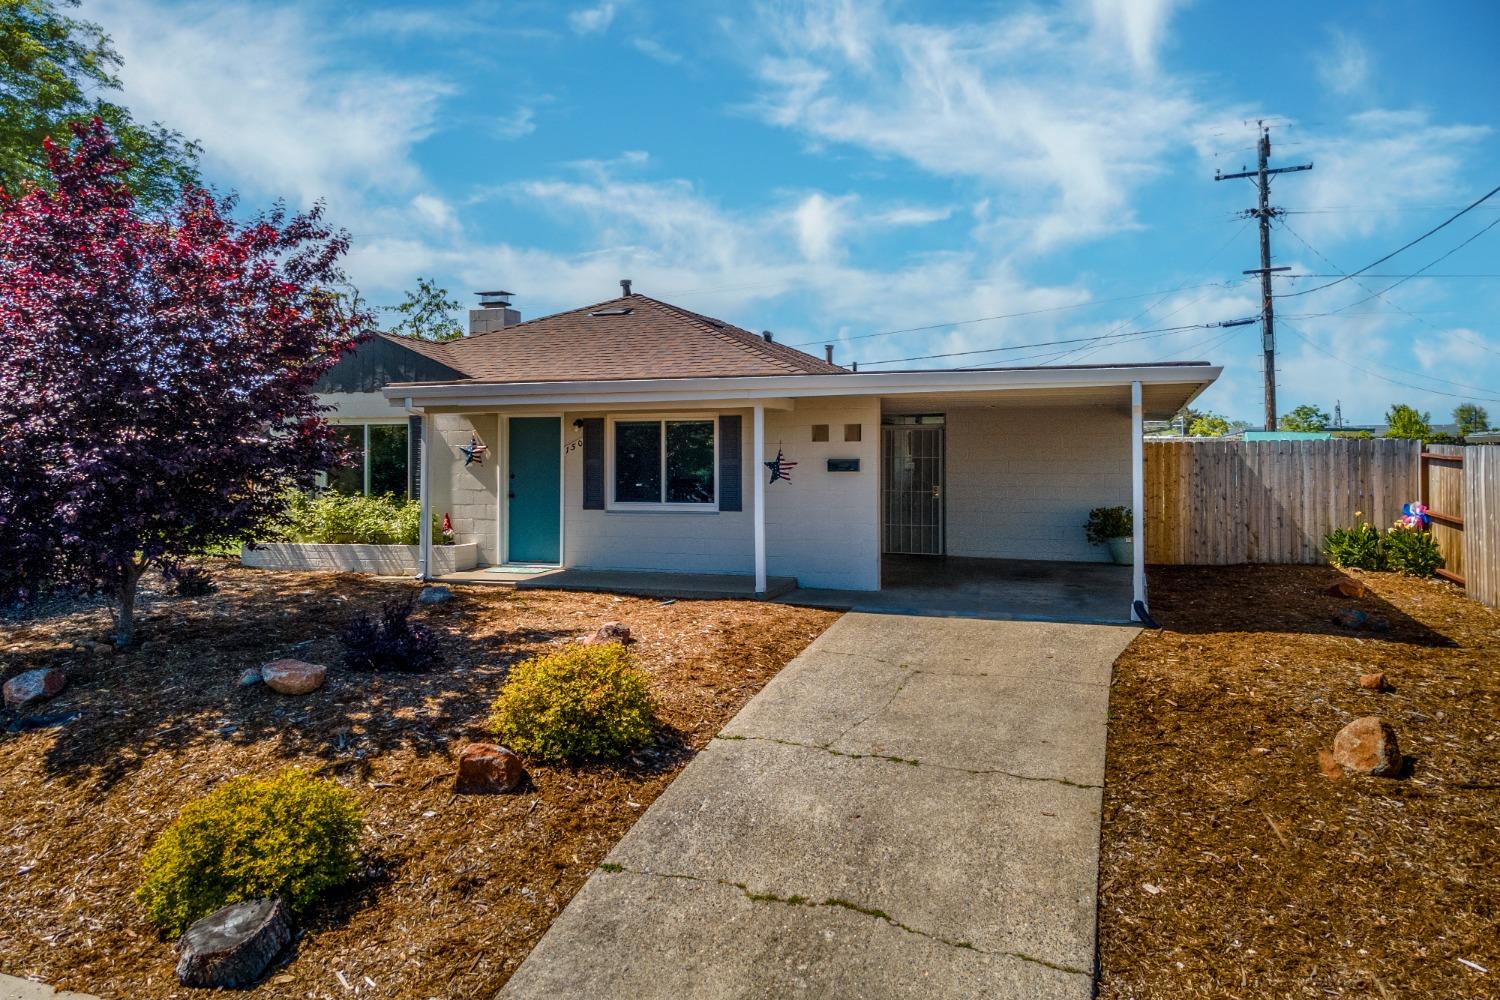 Affordability in Folsom! Welcome to this cute-as-a-button 3-bed 1-bath home in the heart of Folsom. 